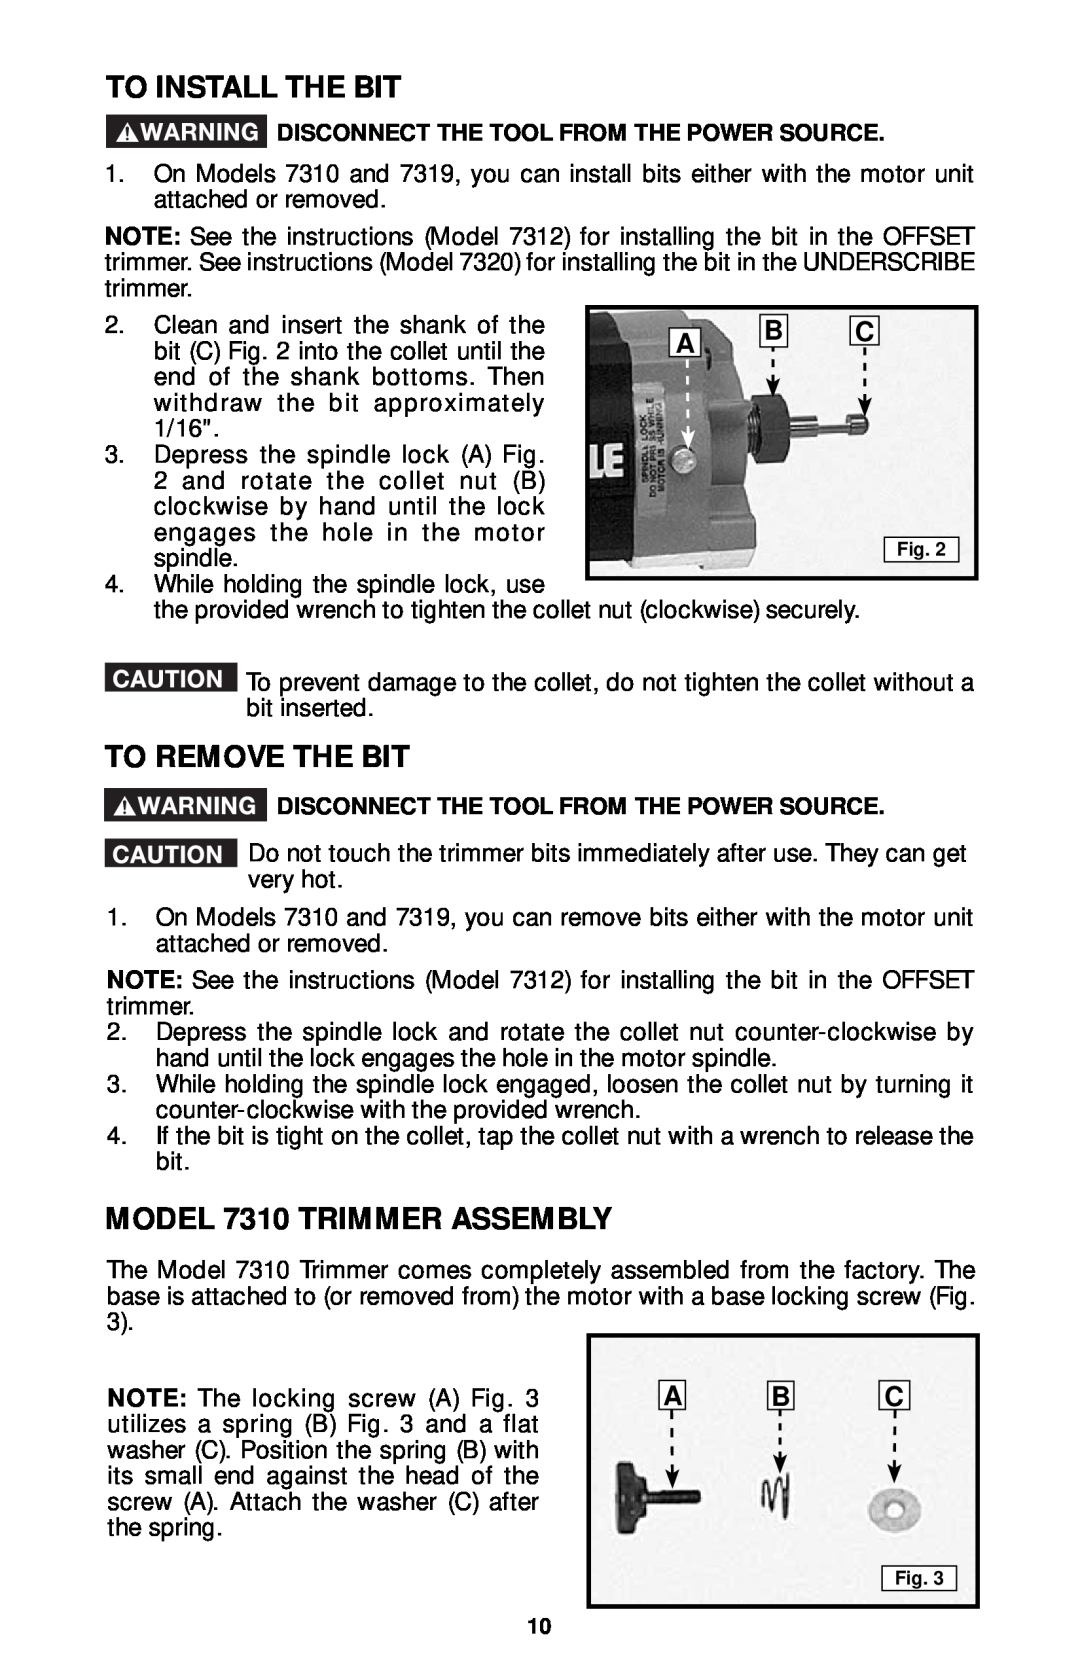 Porter-Cable 7319, 7320, 7312 instruction manual To Install The Bit, To Remove The Bit, MODEL 7310 TRIMMER ASSEMBLY 